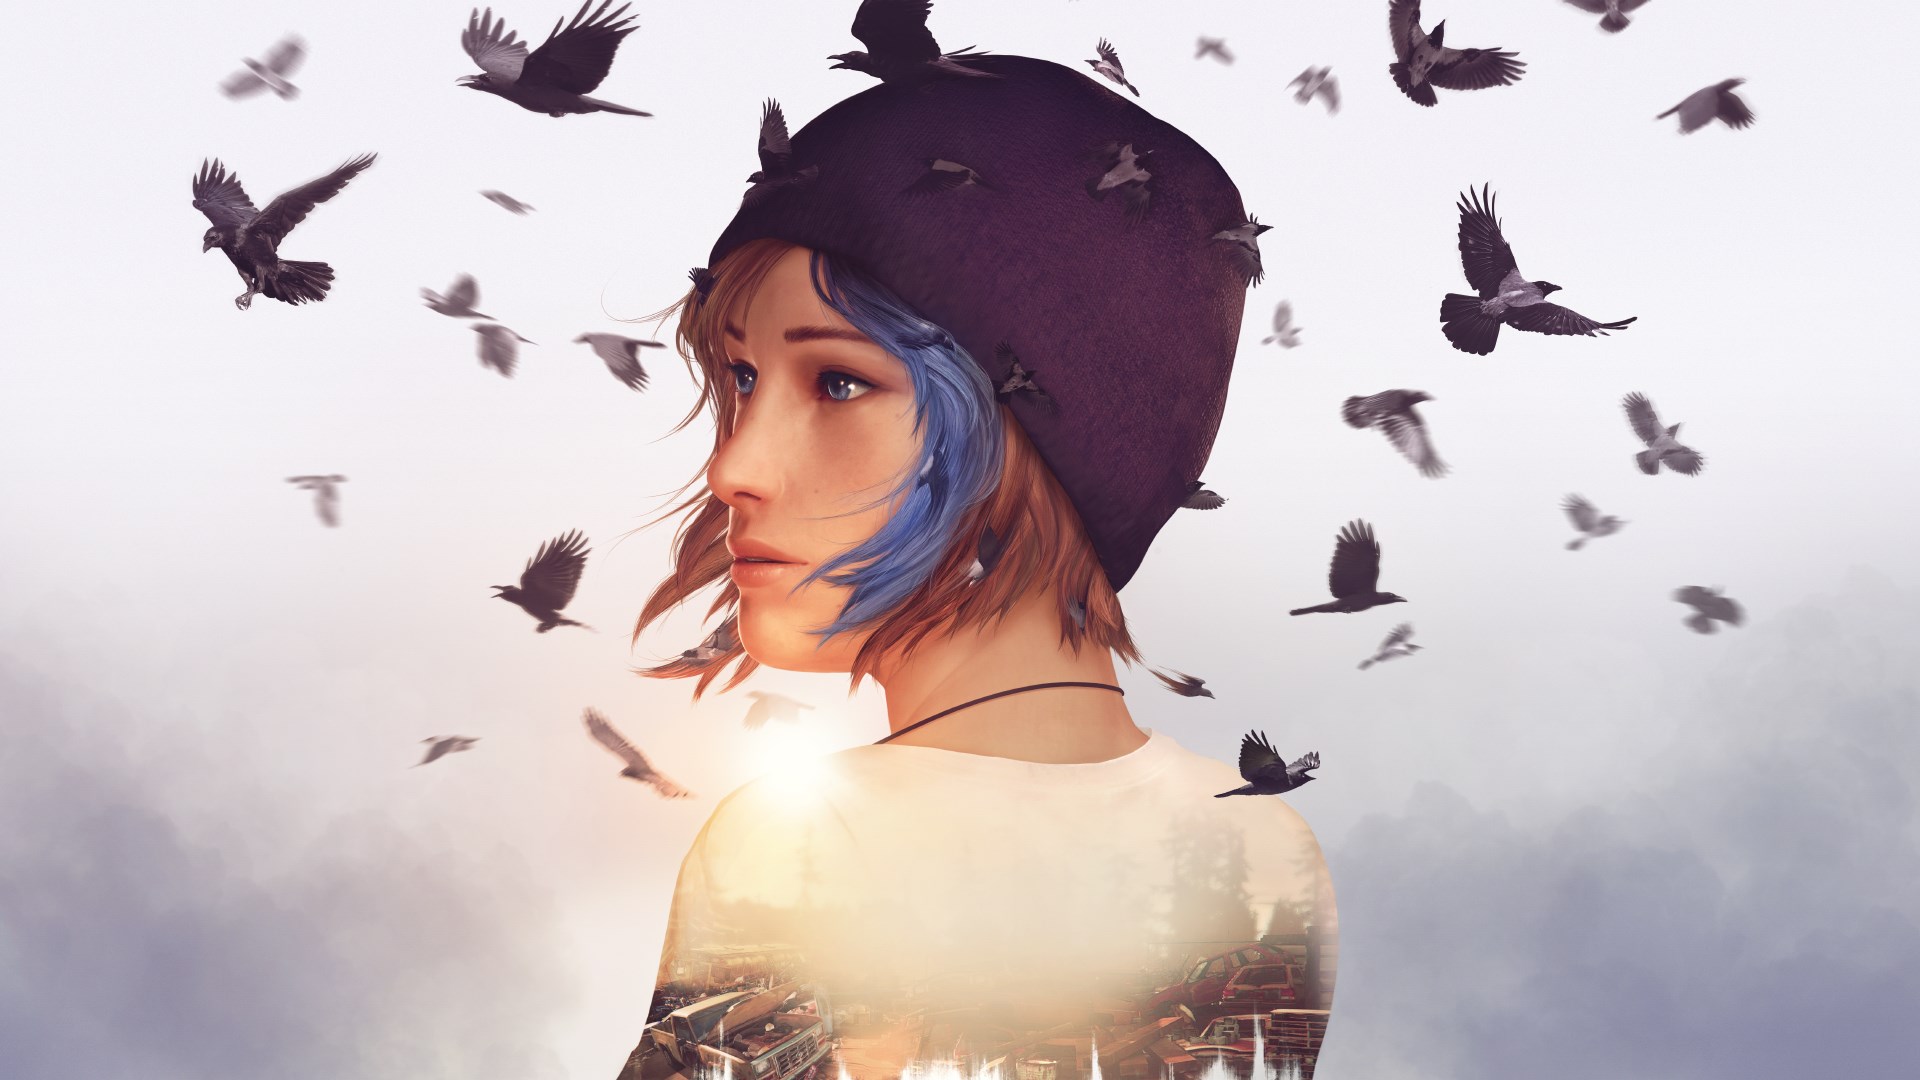 Life is store. Life is Strange before the Storm Remastered. Life is Strange before the Storm ремастер. Chloe Price Remastered.